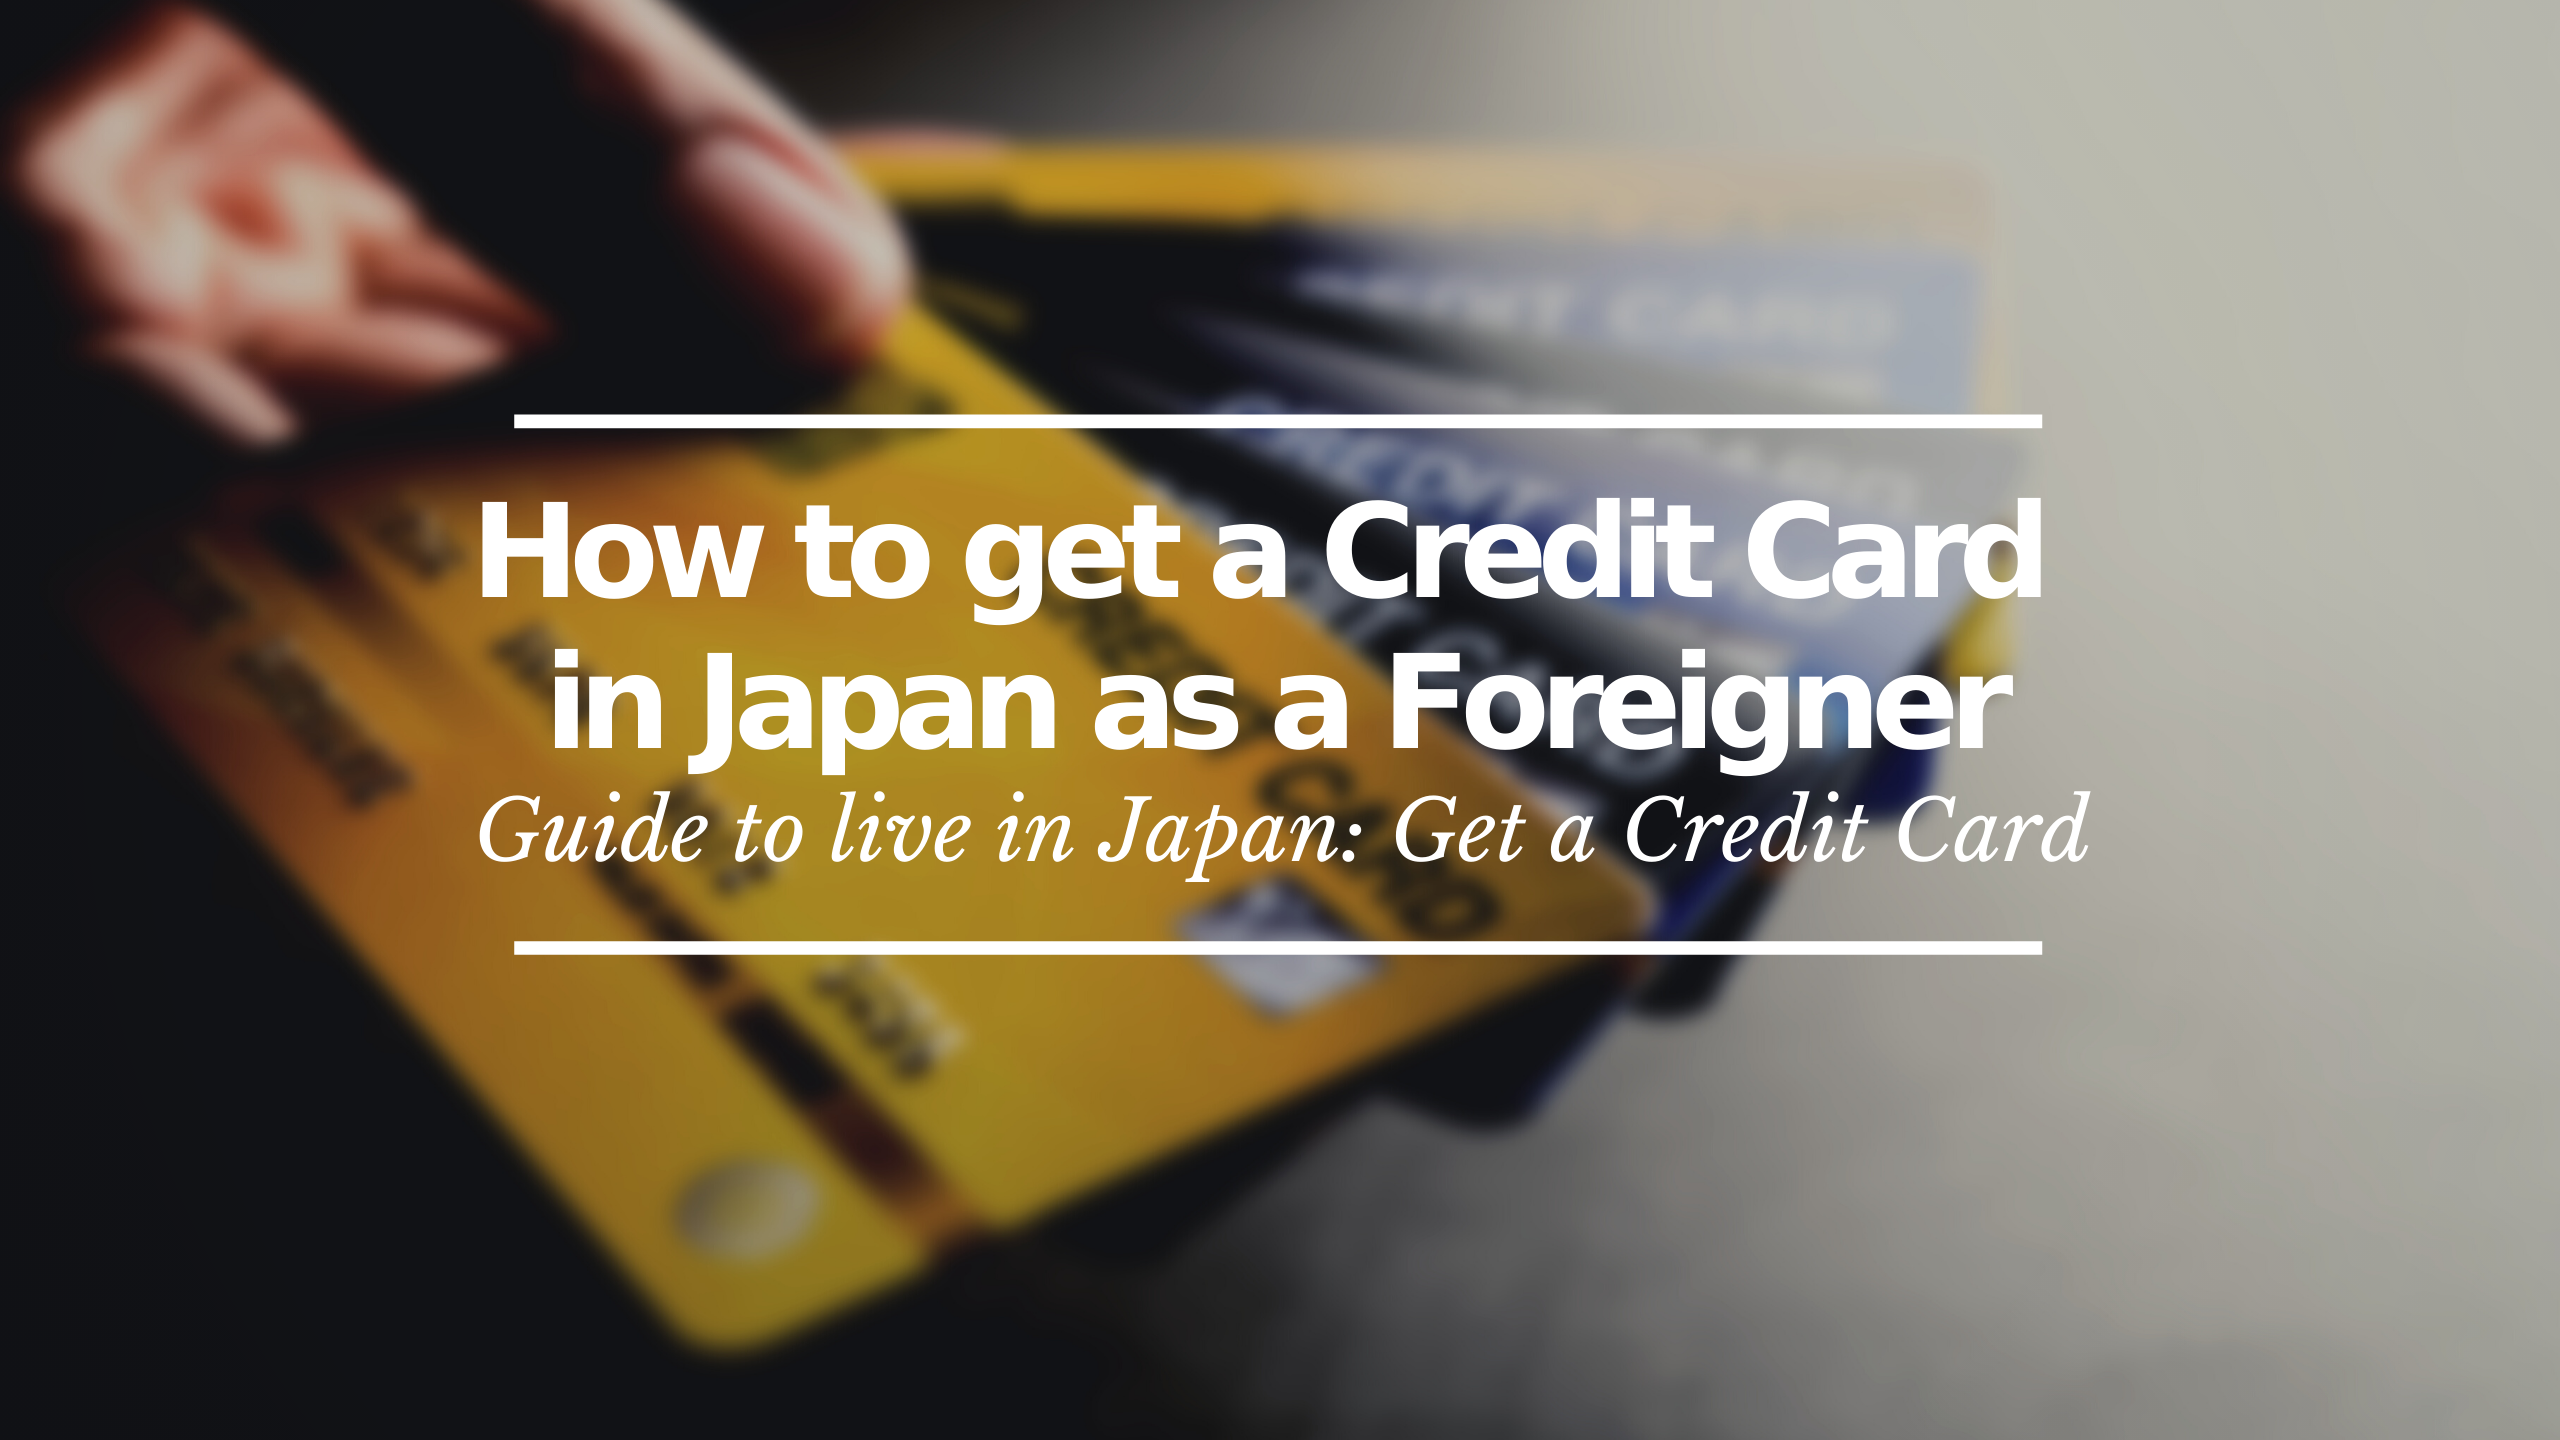 How to get a Credit Card in Japan as a Foreigner